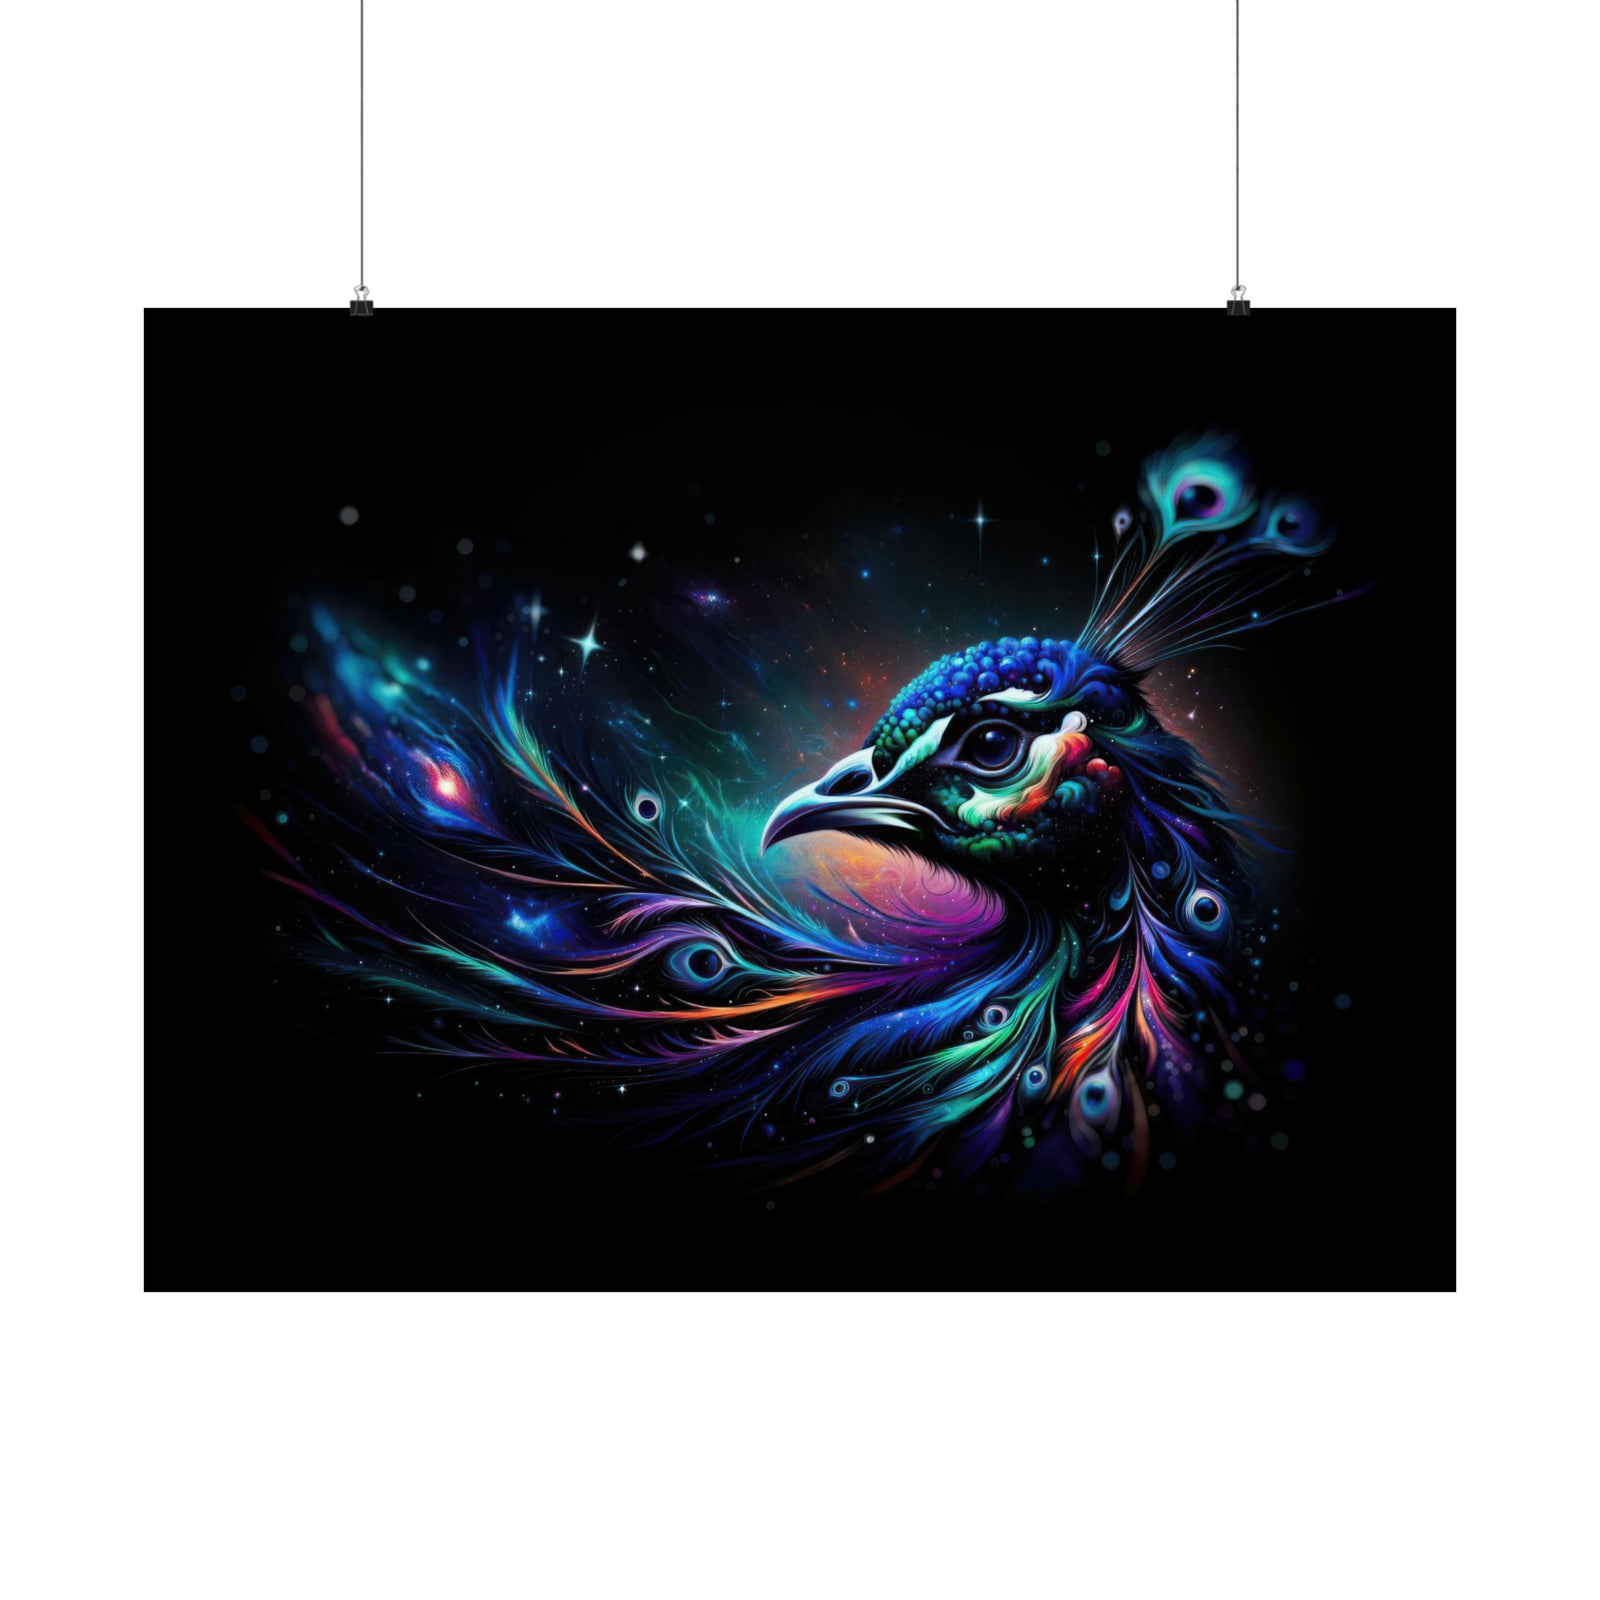 Plumage stellaire Poster